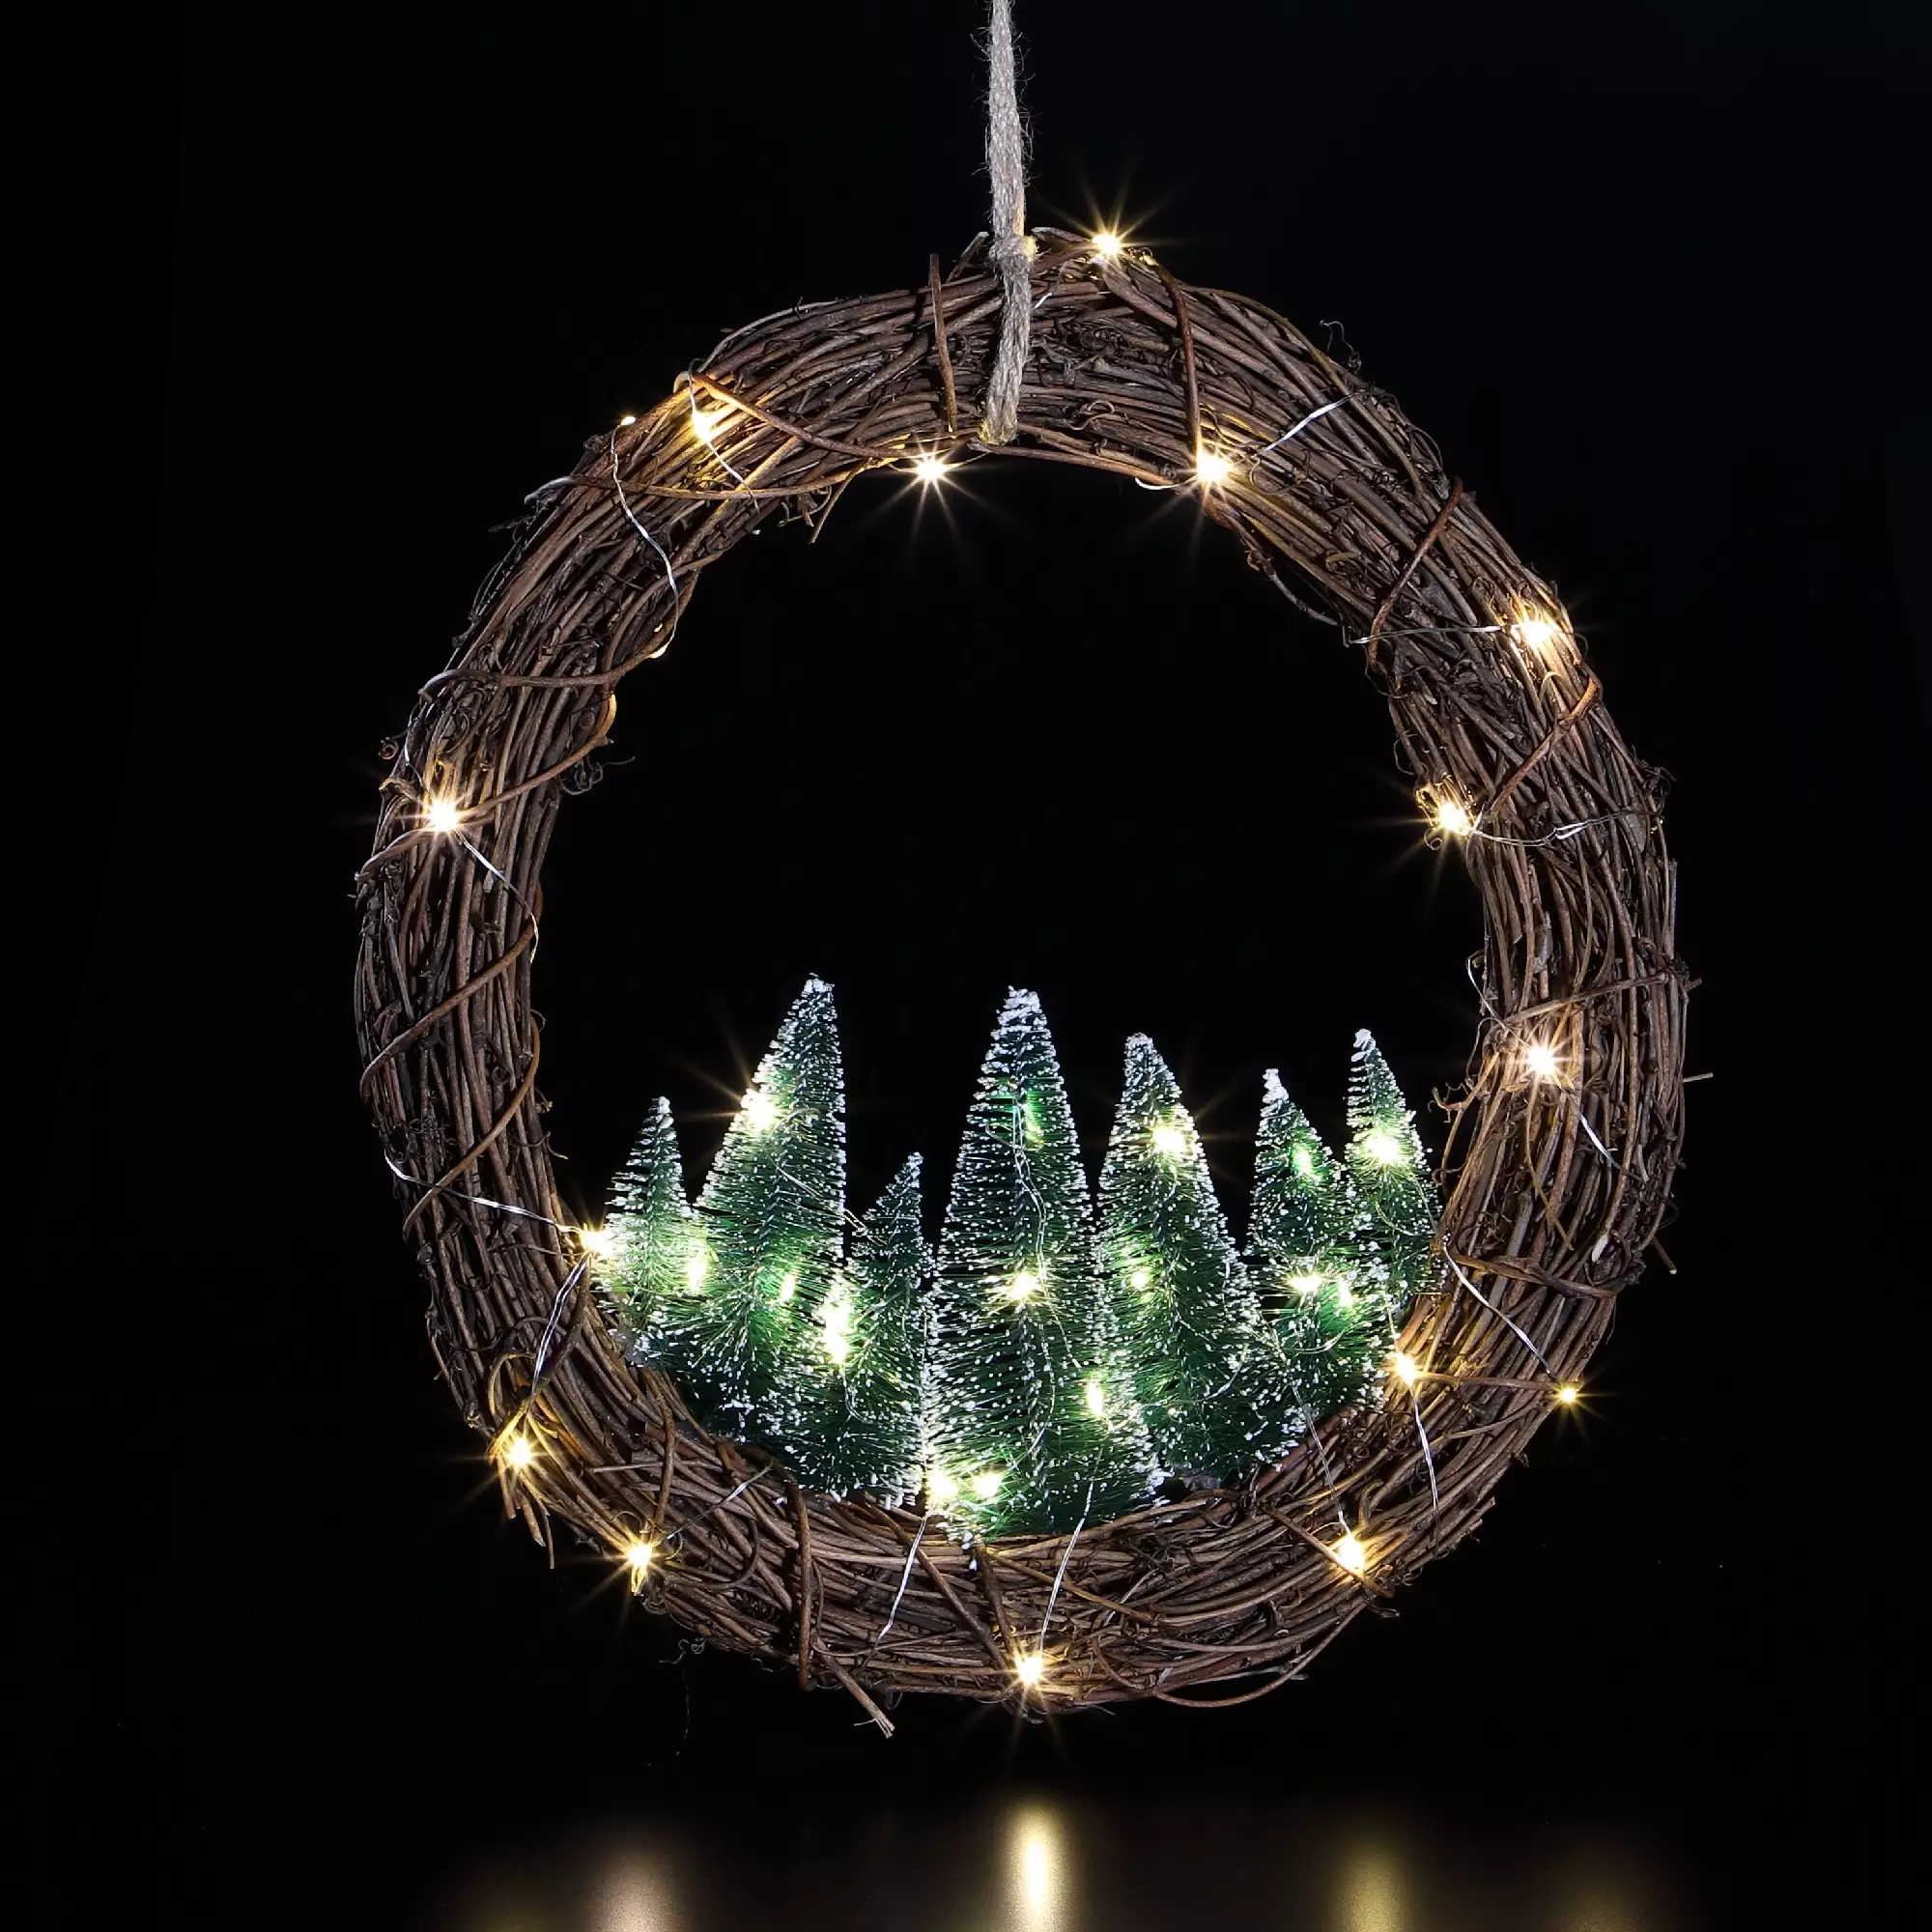 Rattan Hanging Wreath with Bristle Trees With Warm White Lights